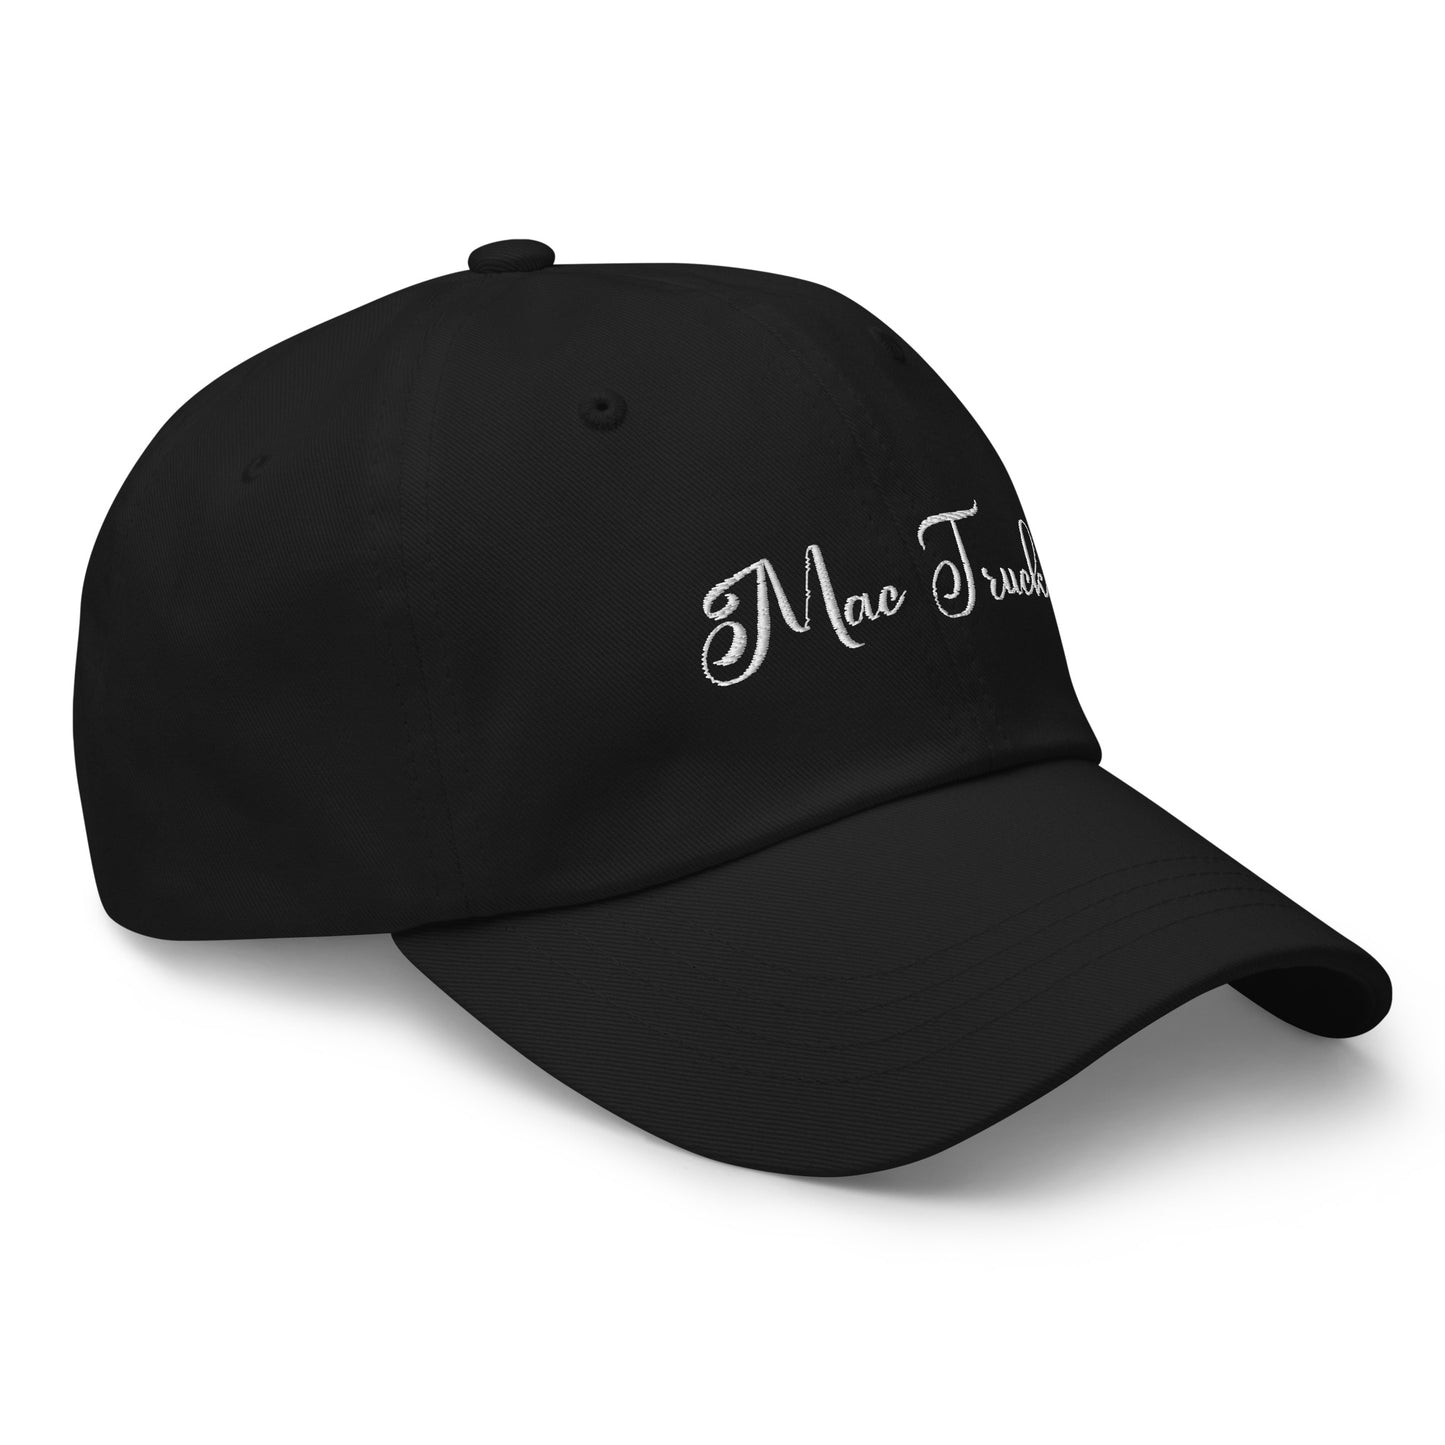 Play Fake Nickname Embroidered Dad hat